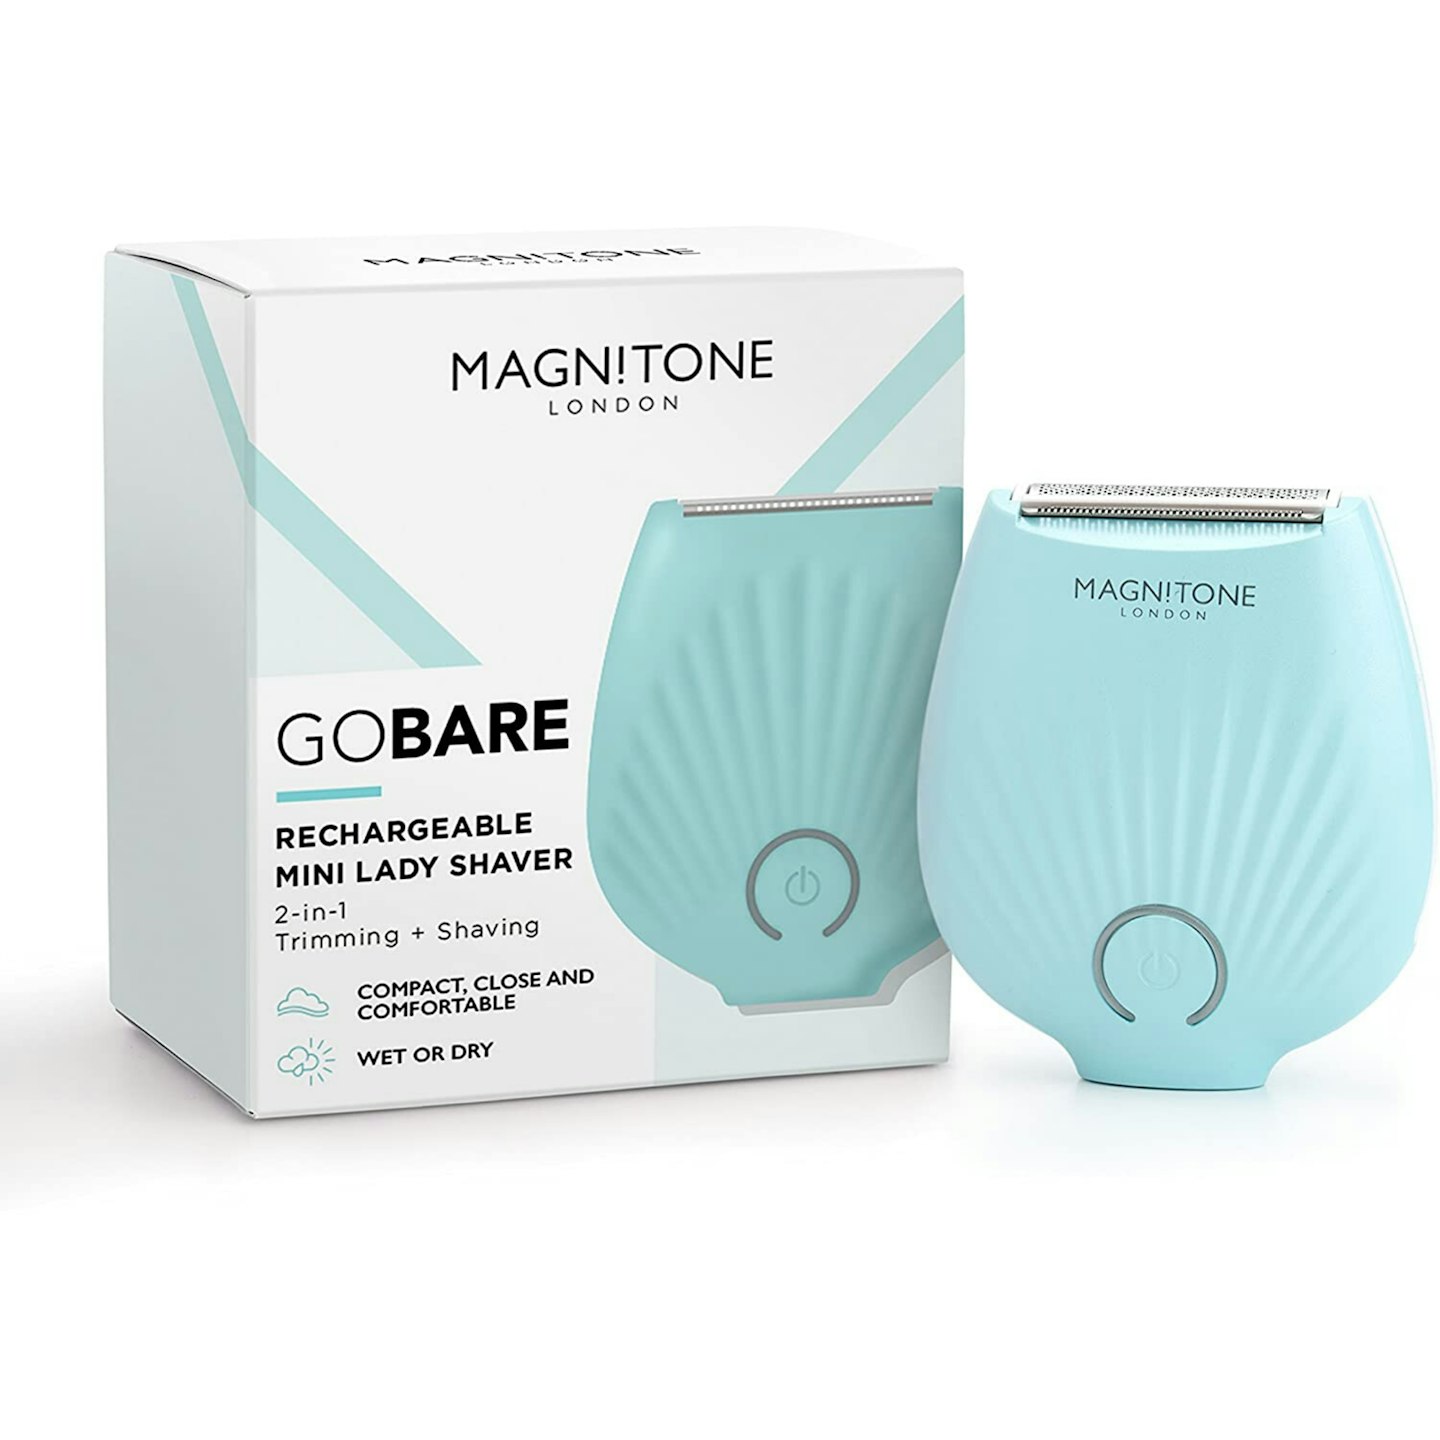 Magnitone Go Bare! Rechargeable Mini Lady Shaver - 2-in-1 Trimming and Shaving